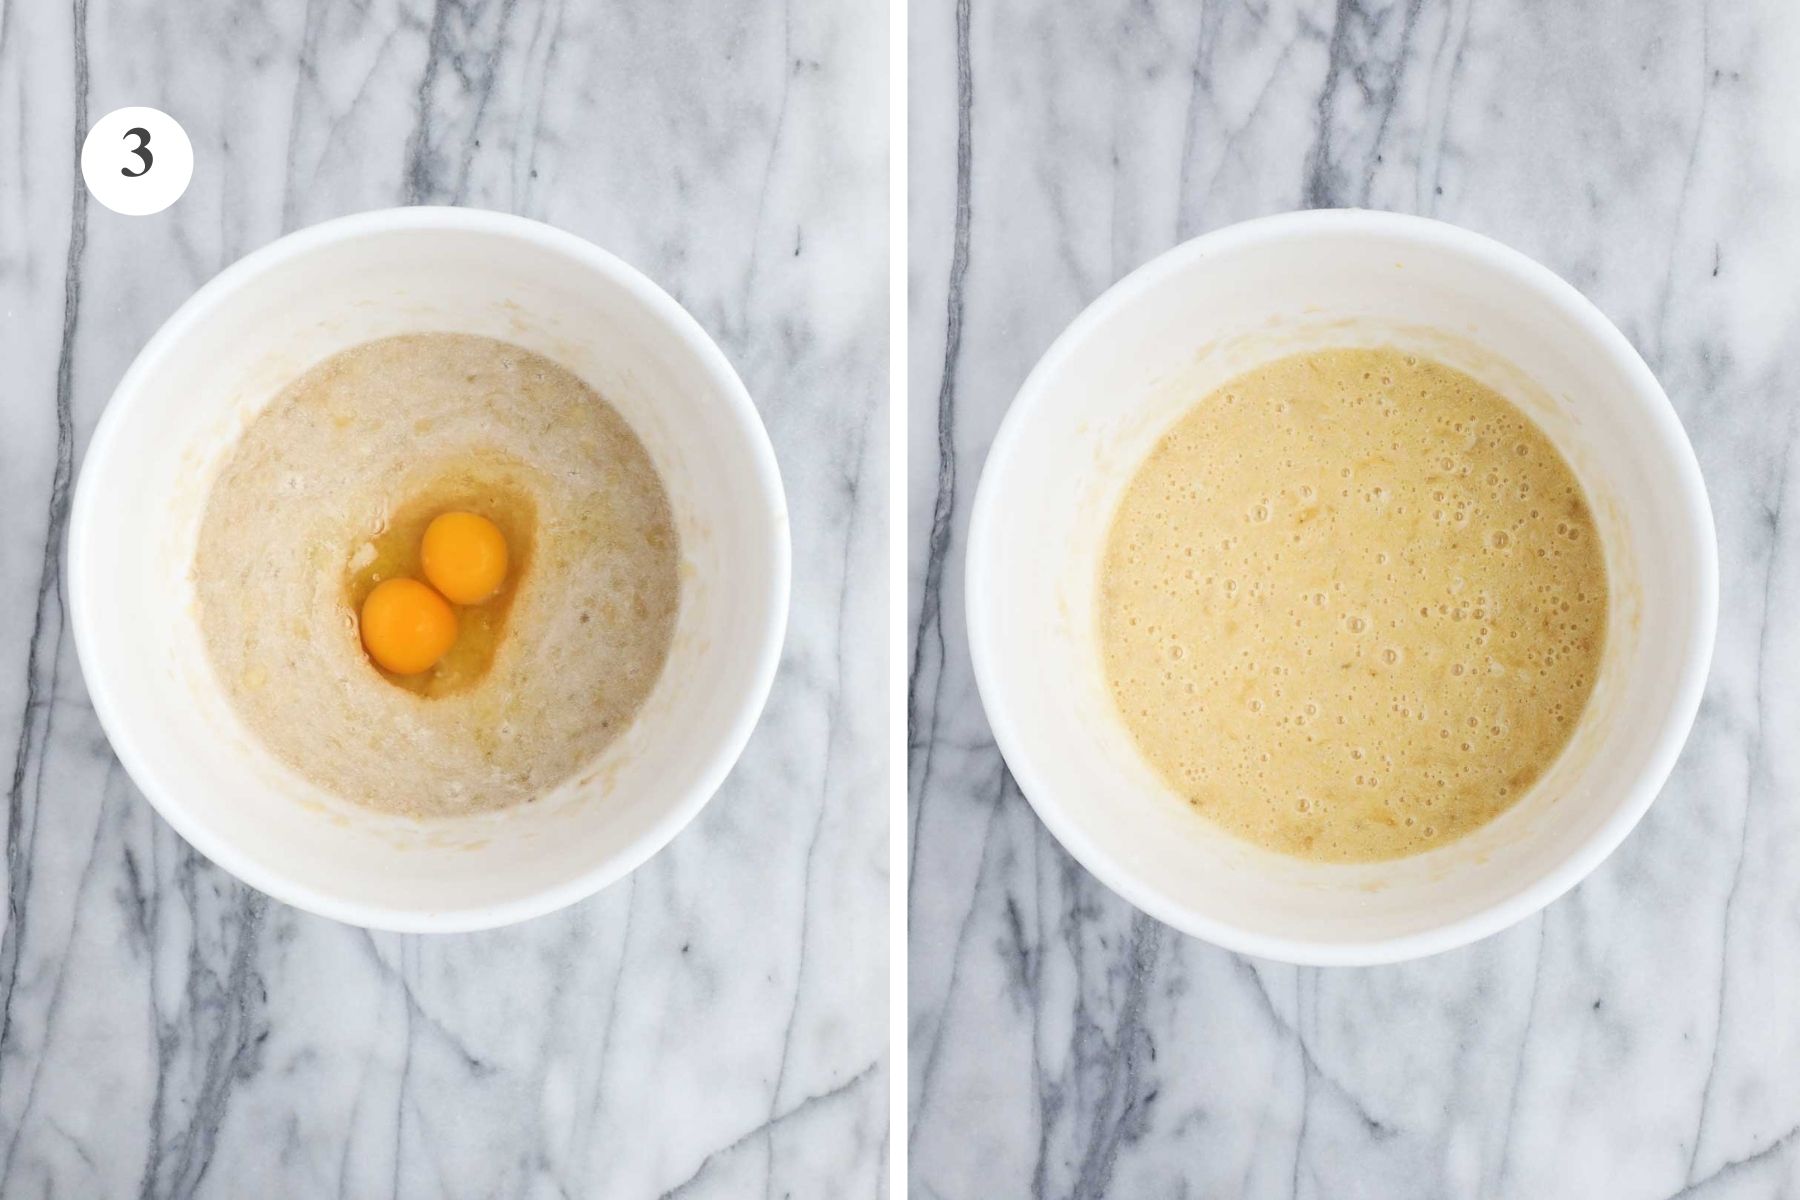 Mixing Bowl with eggs, next to image of the same bowl with the eggs incorporated into the batter.